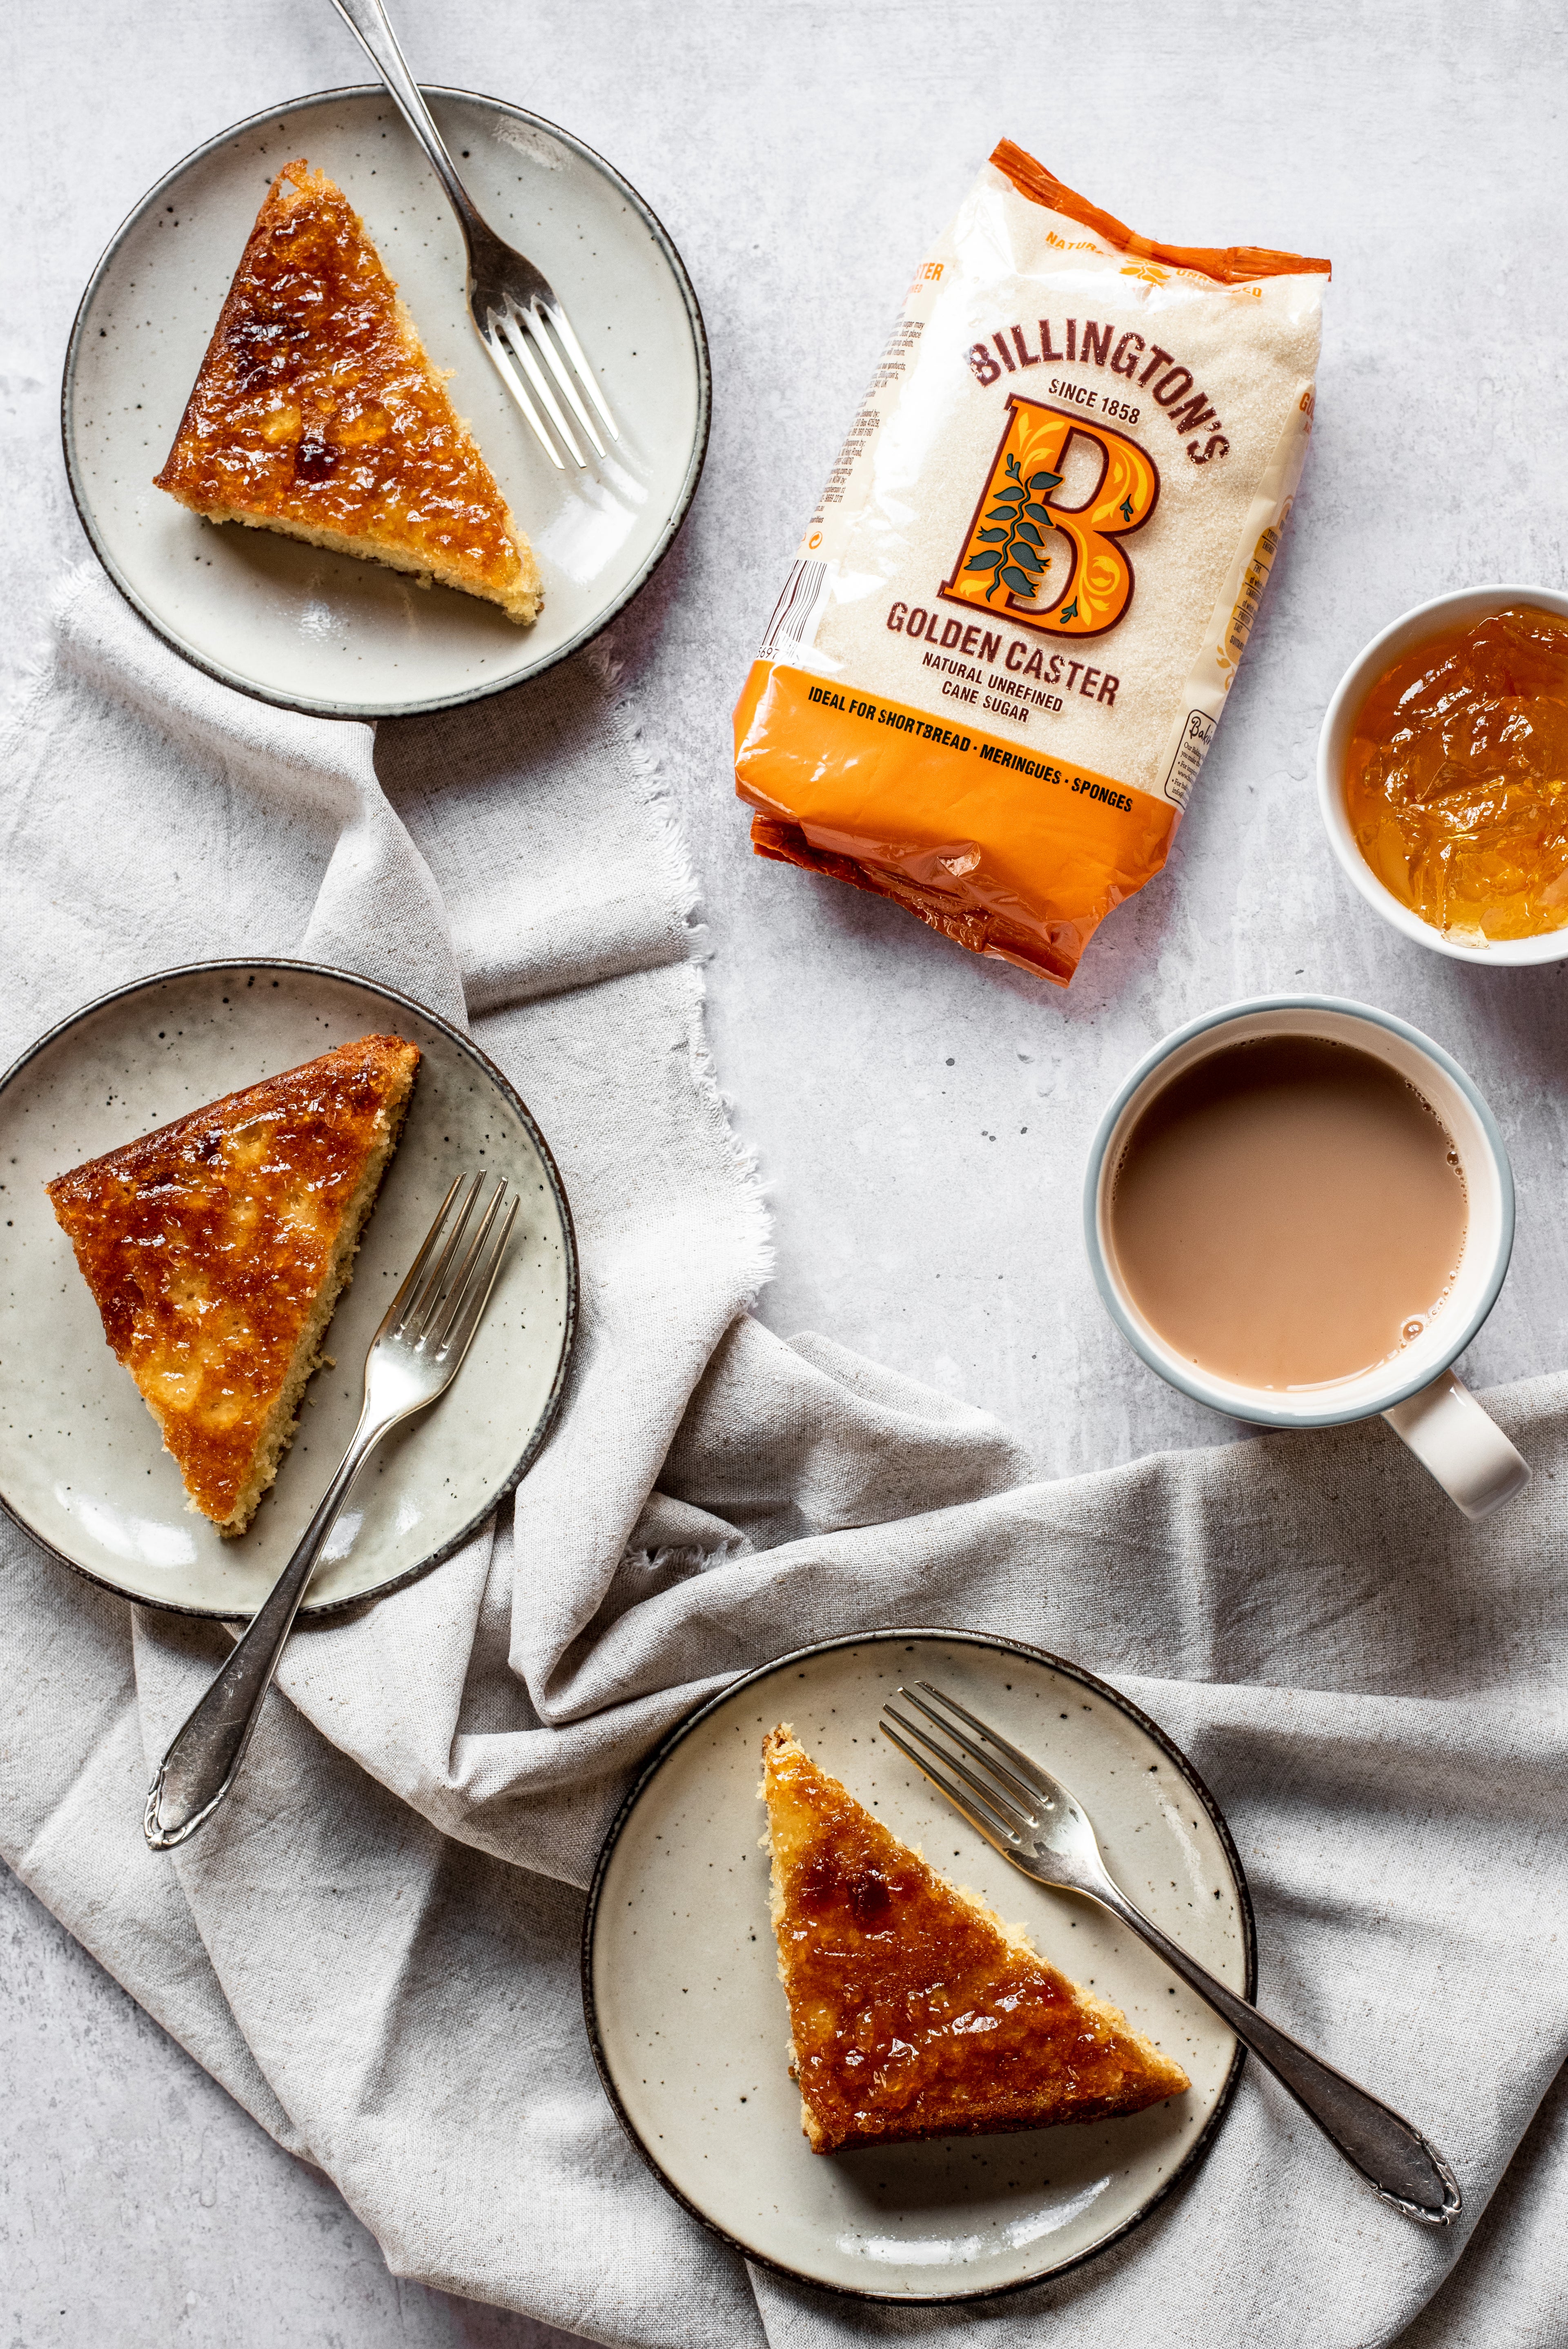 Slices of Marmalade Traybake on plates served with forks, next to a bag of Billington's Caster Sugar and a bowl of marmalade